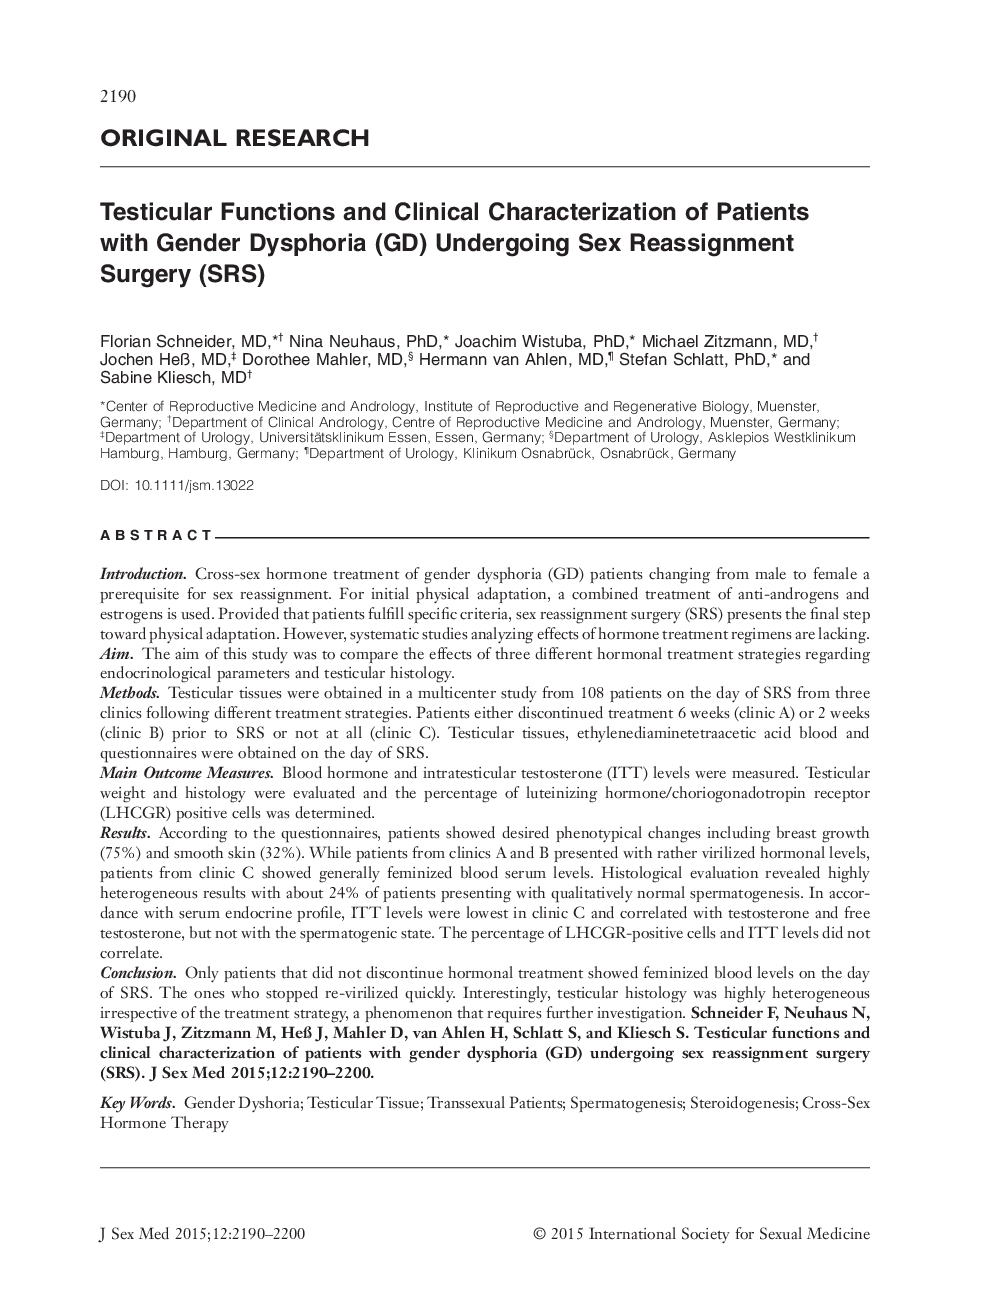 Testicular Functions and Clinical Characterization of Patients with Gender Dysphoria (GD) Undergoing Sex Reassignment Surgery (SRS)